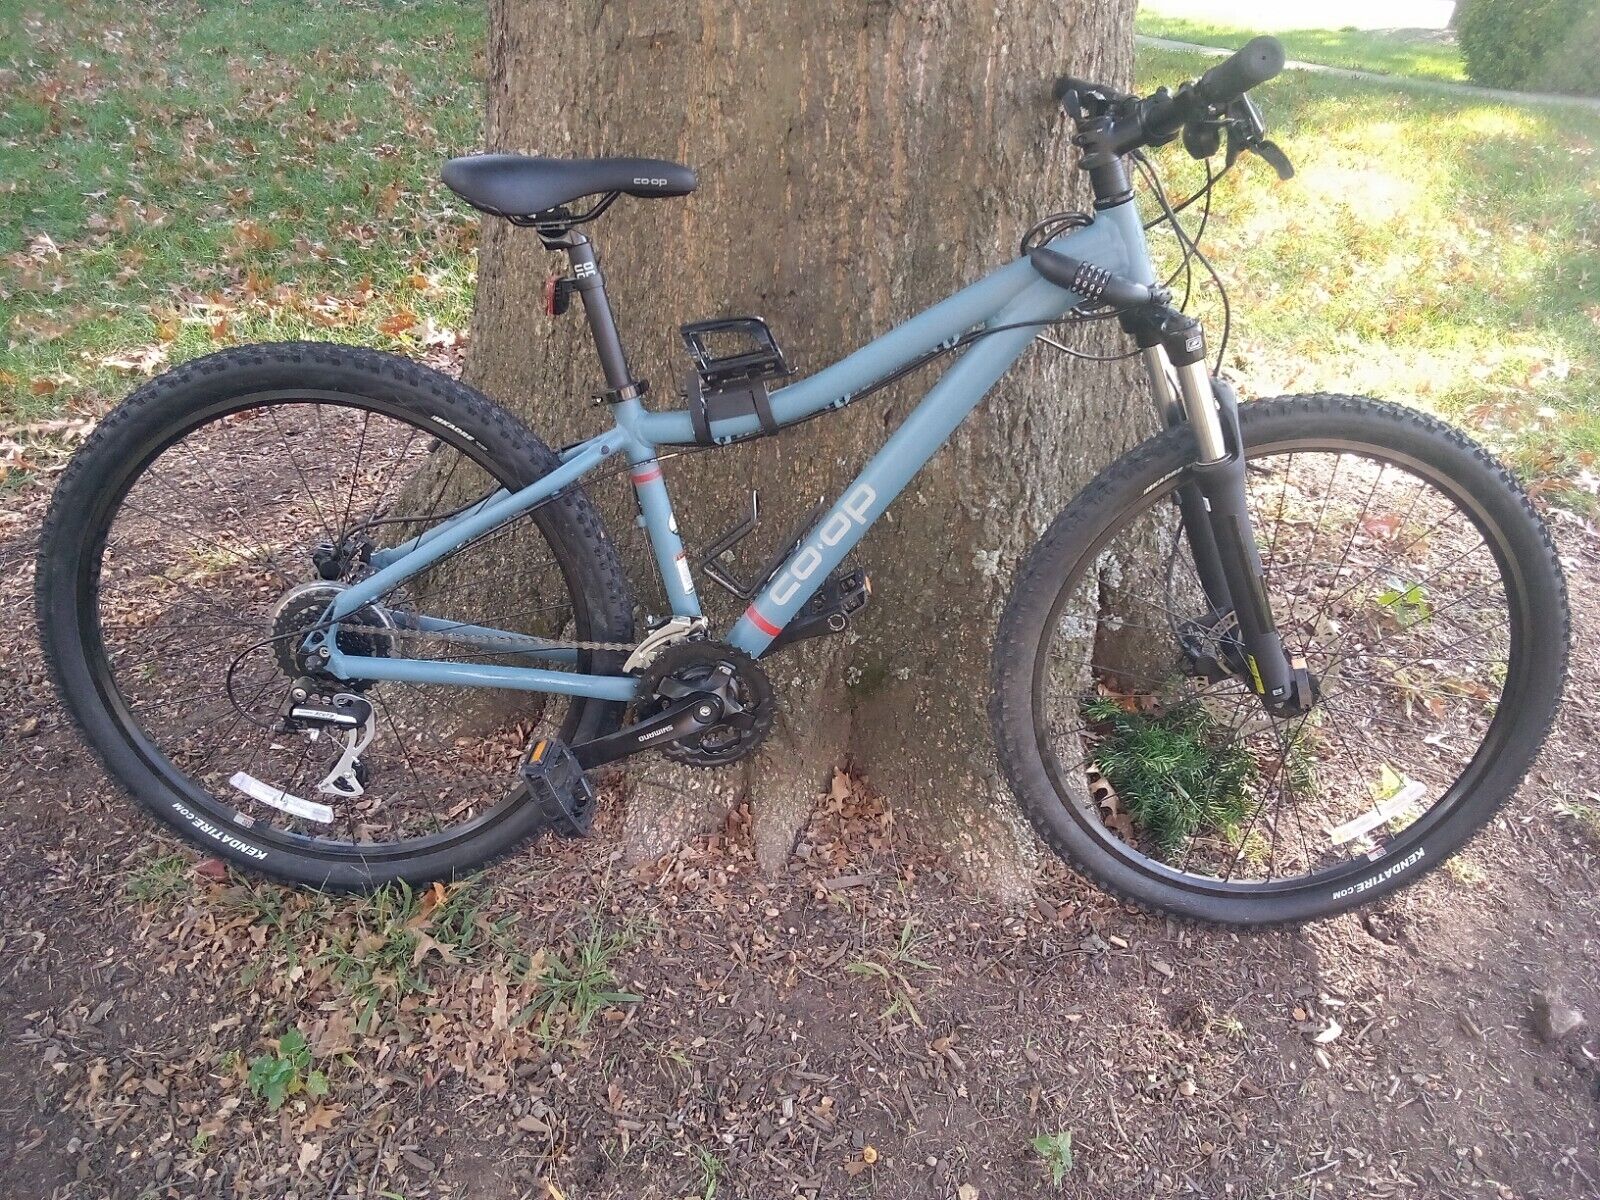 CoOp Bicycle DRT 27.5 With Kenda Tires & Shimano Gear System Co Op Mountain Bike